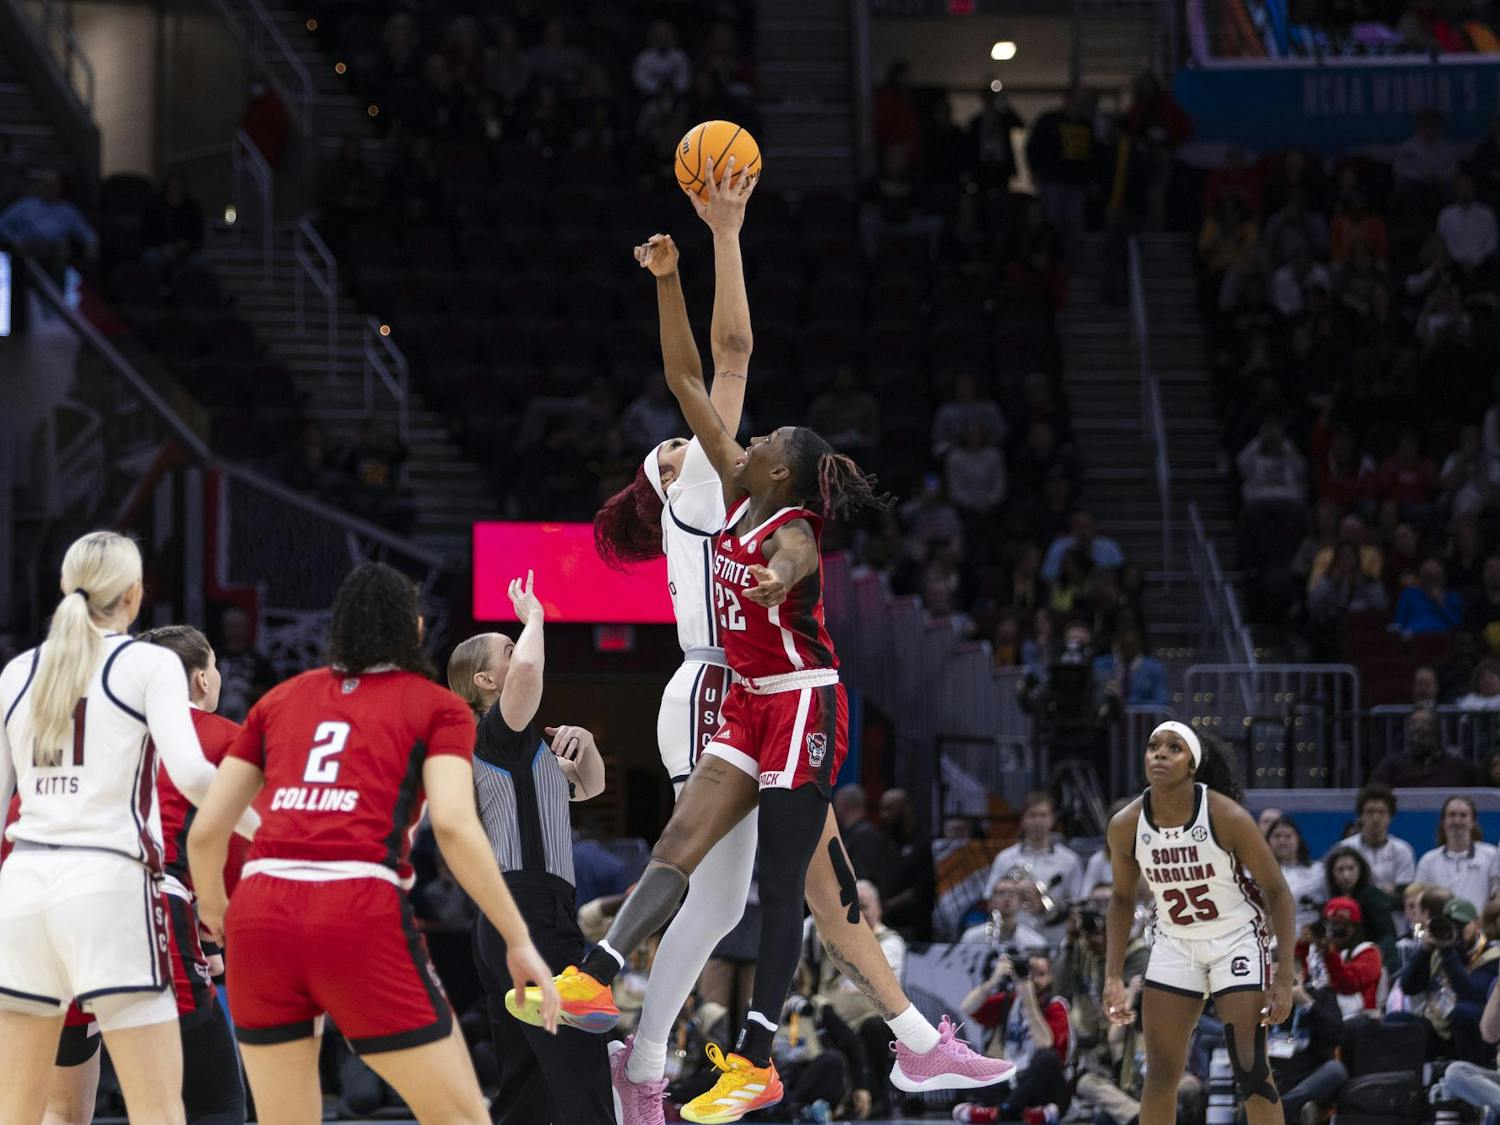 The South Carolina ɫɫƵs delivered a decisive victory to the North Carolina State Wolfpack in the first of two semifinal games at the 2024 Women’s Final Four matchup on April 5, 2024. The ɫɫƵs defeated the Wolf Pack 78-59 at Rocket Mortgage FieldHouse in Cleveland, OH.